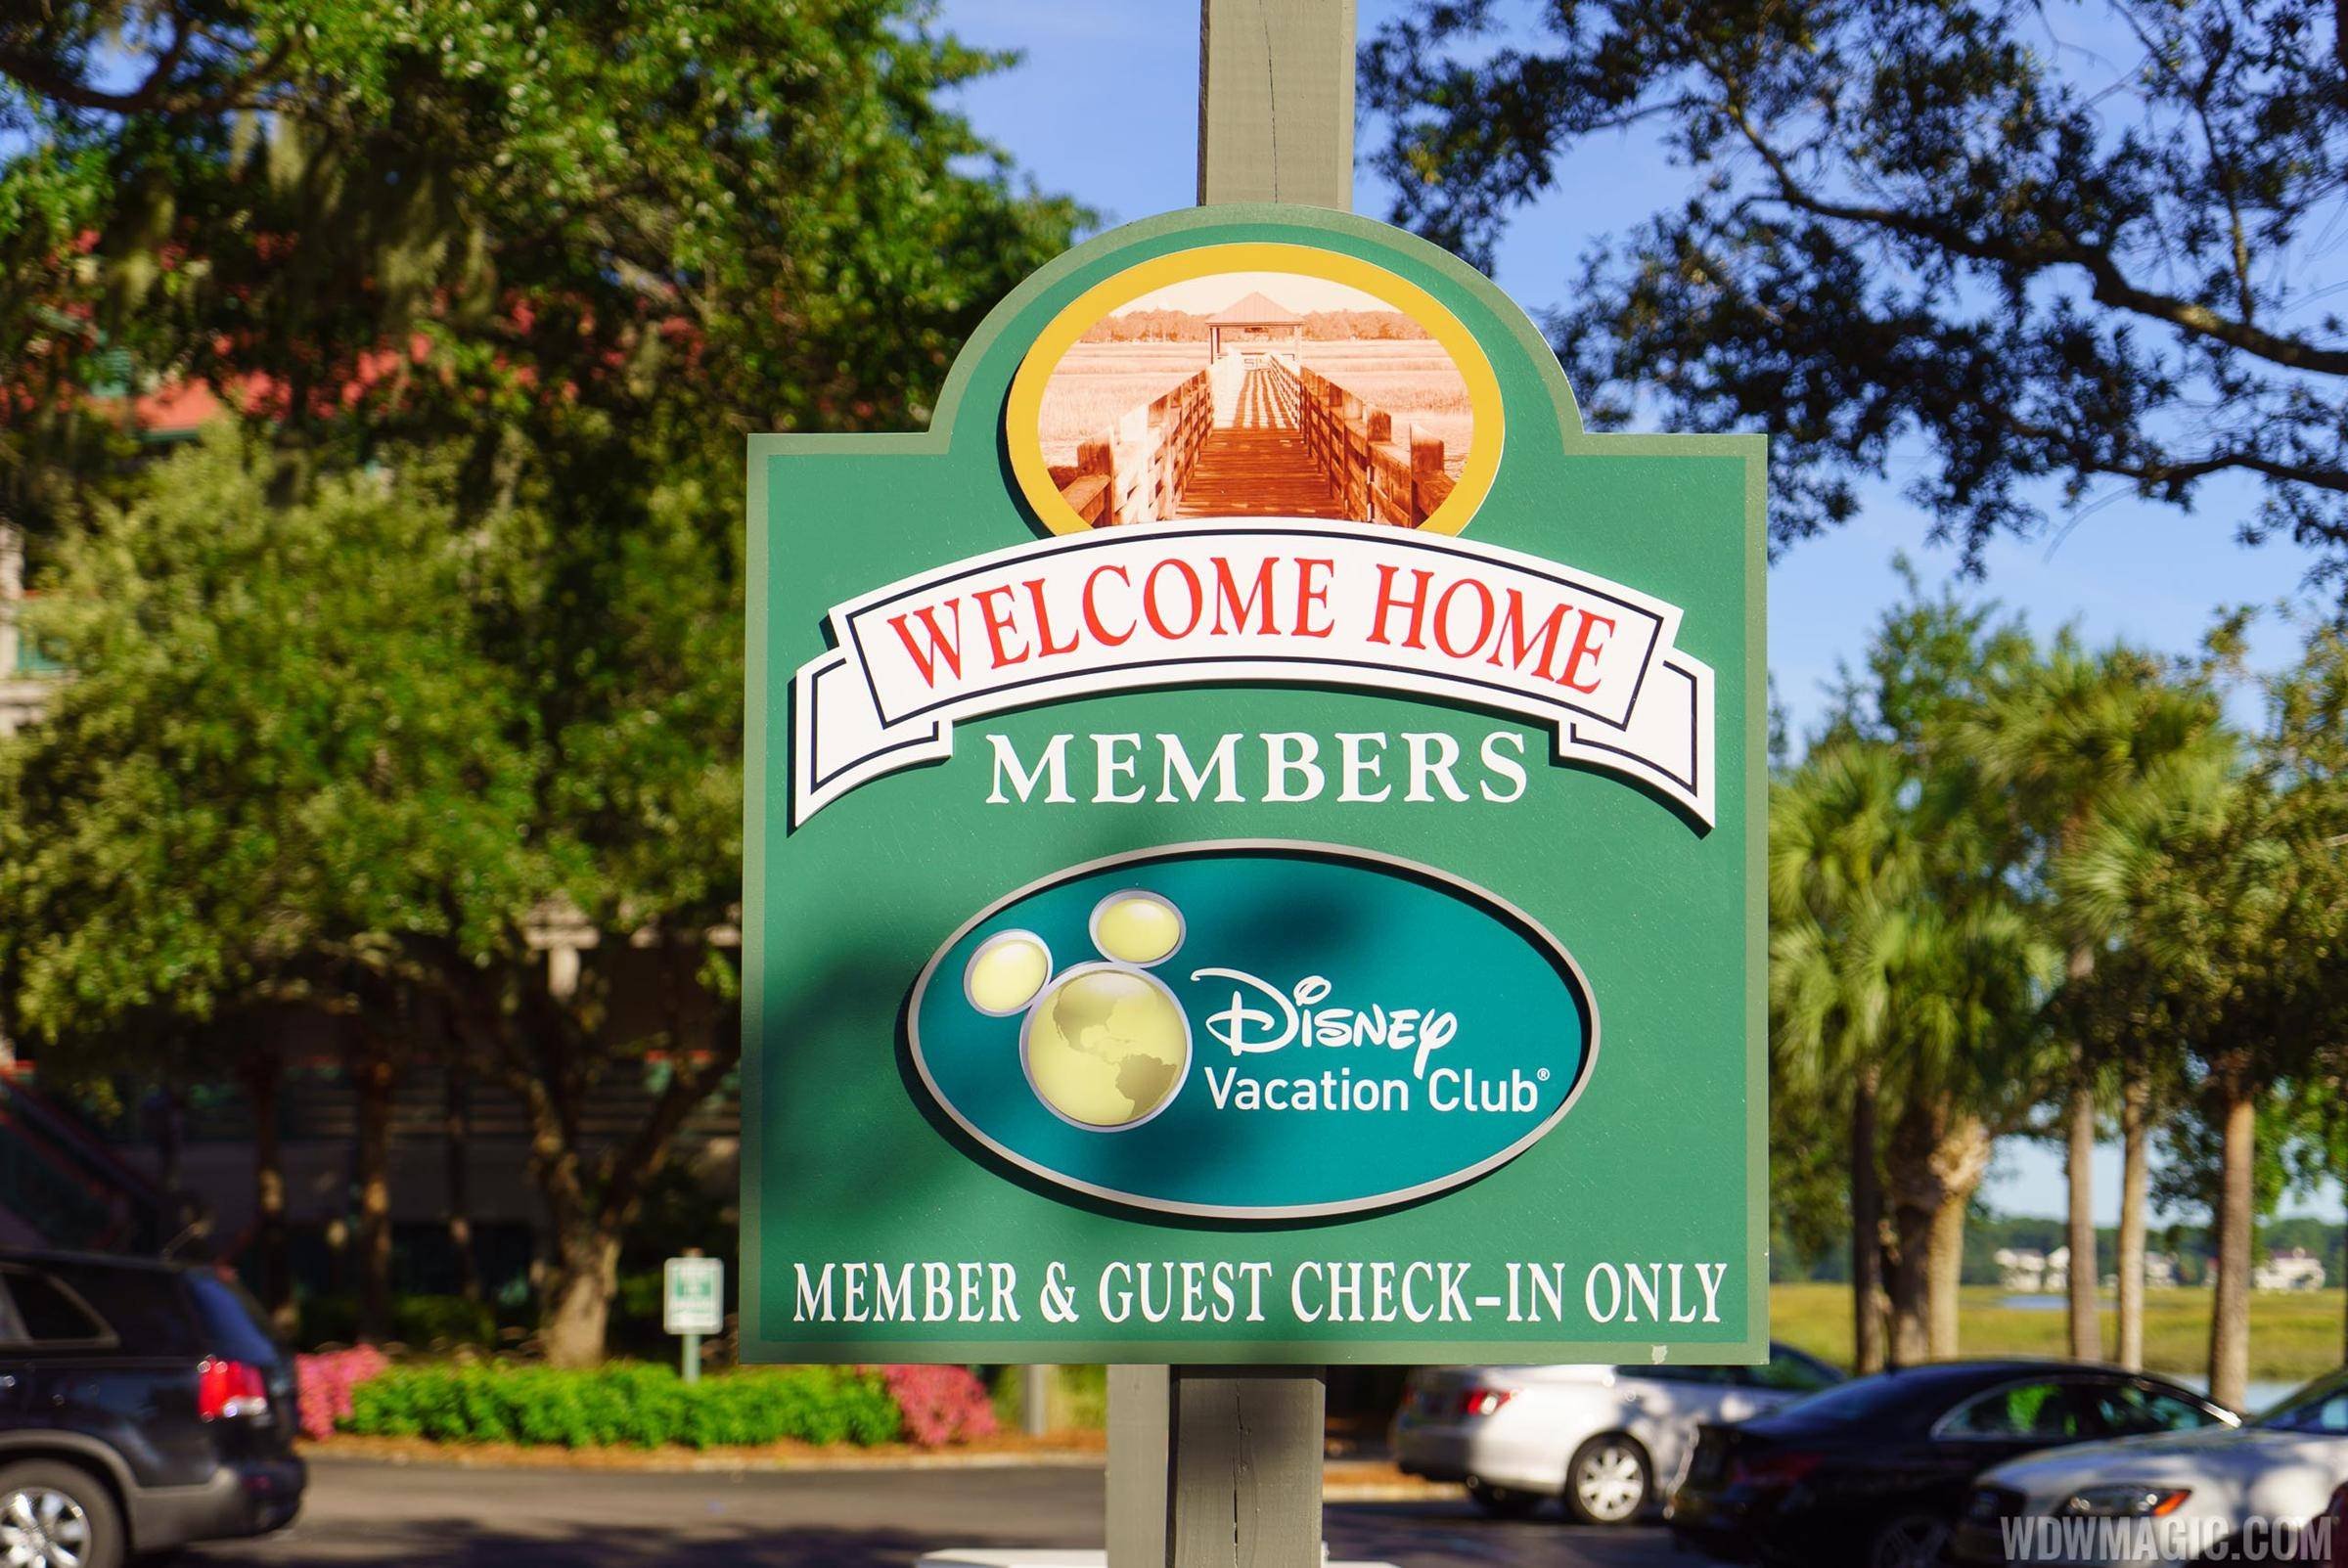 Disney Vacation Club eliminates Membership Extras for members who purchase indirectly